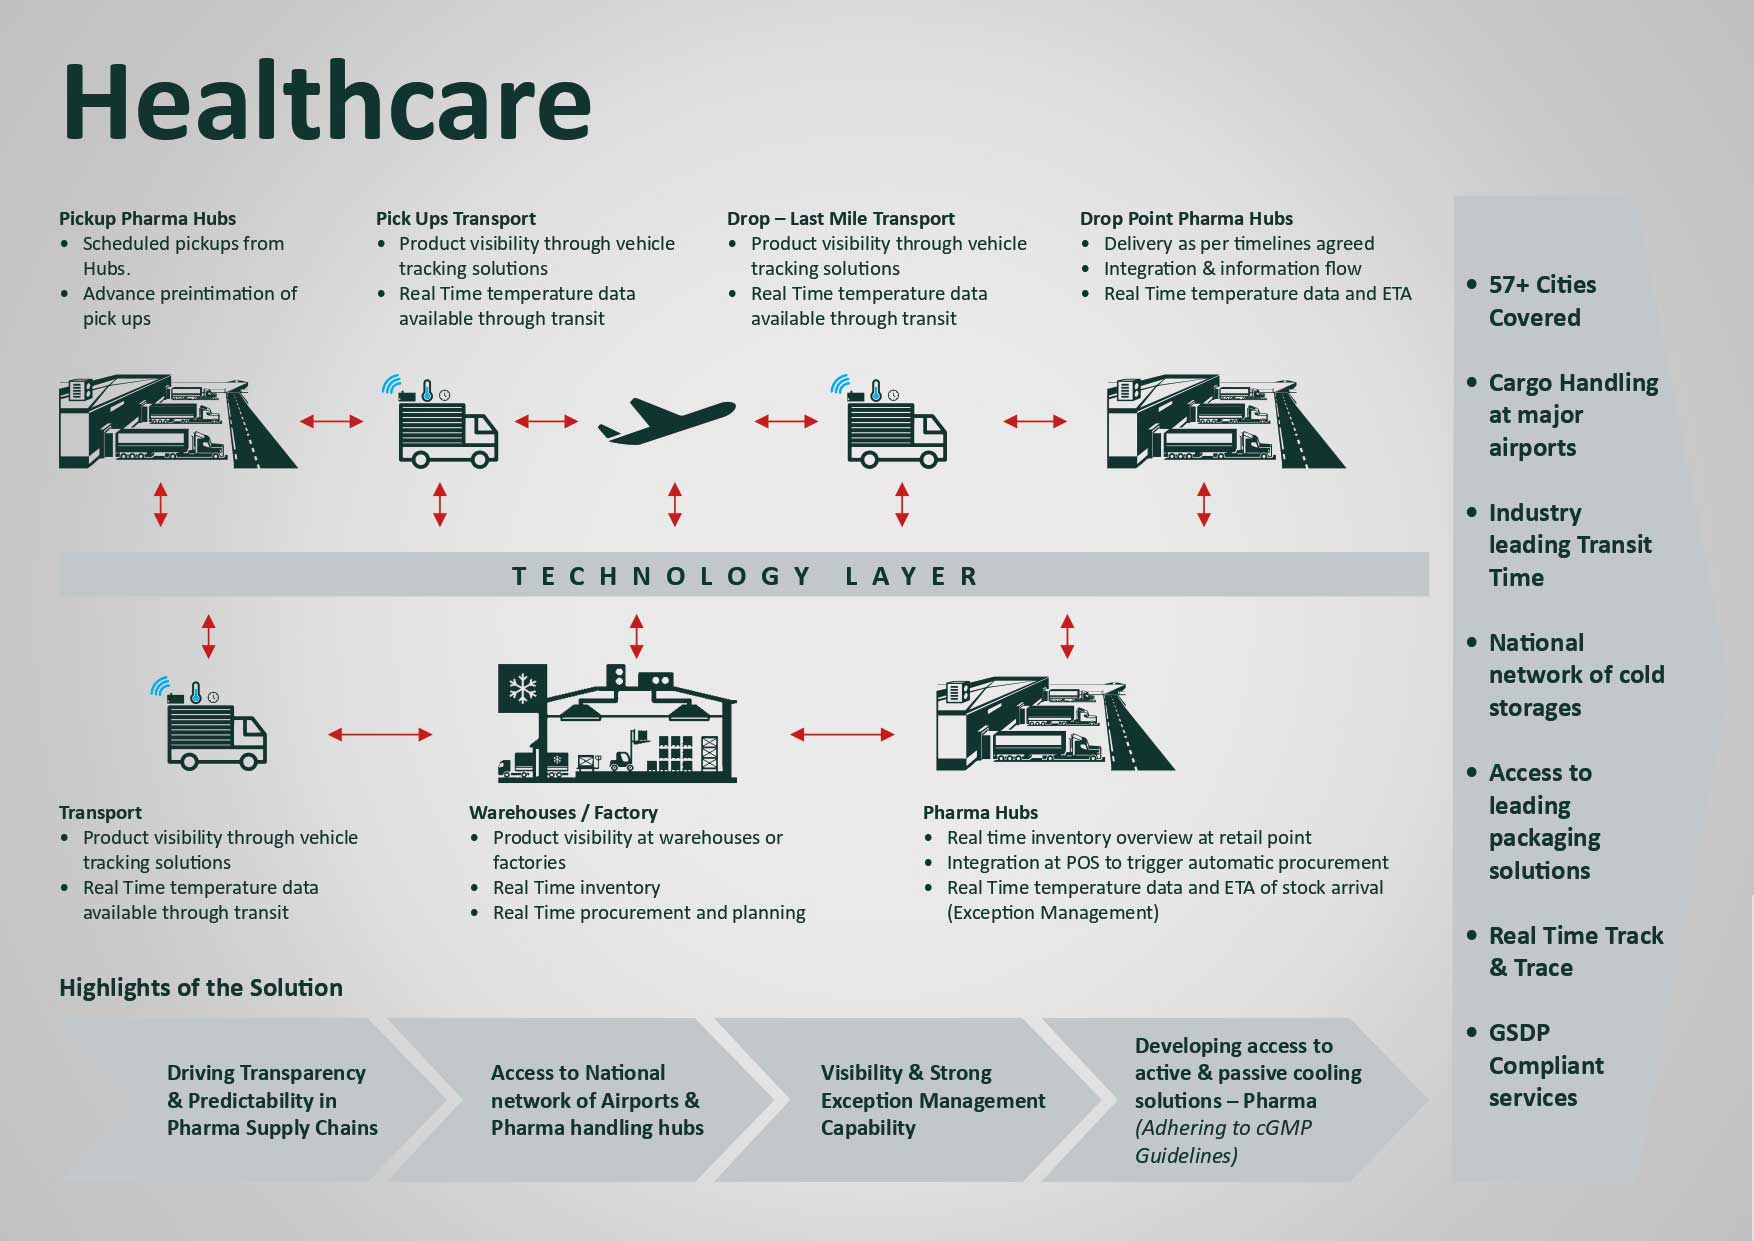 Healthcare Technology Layer